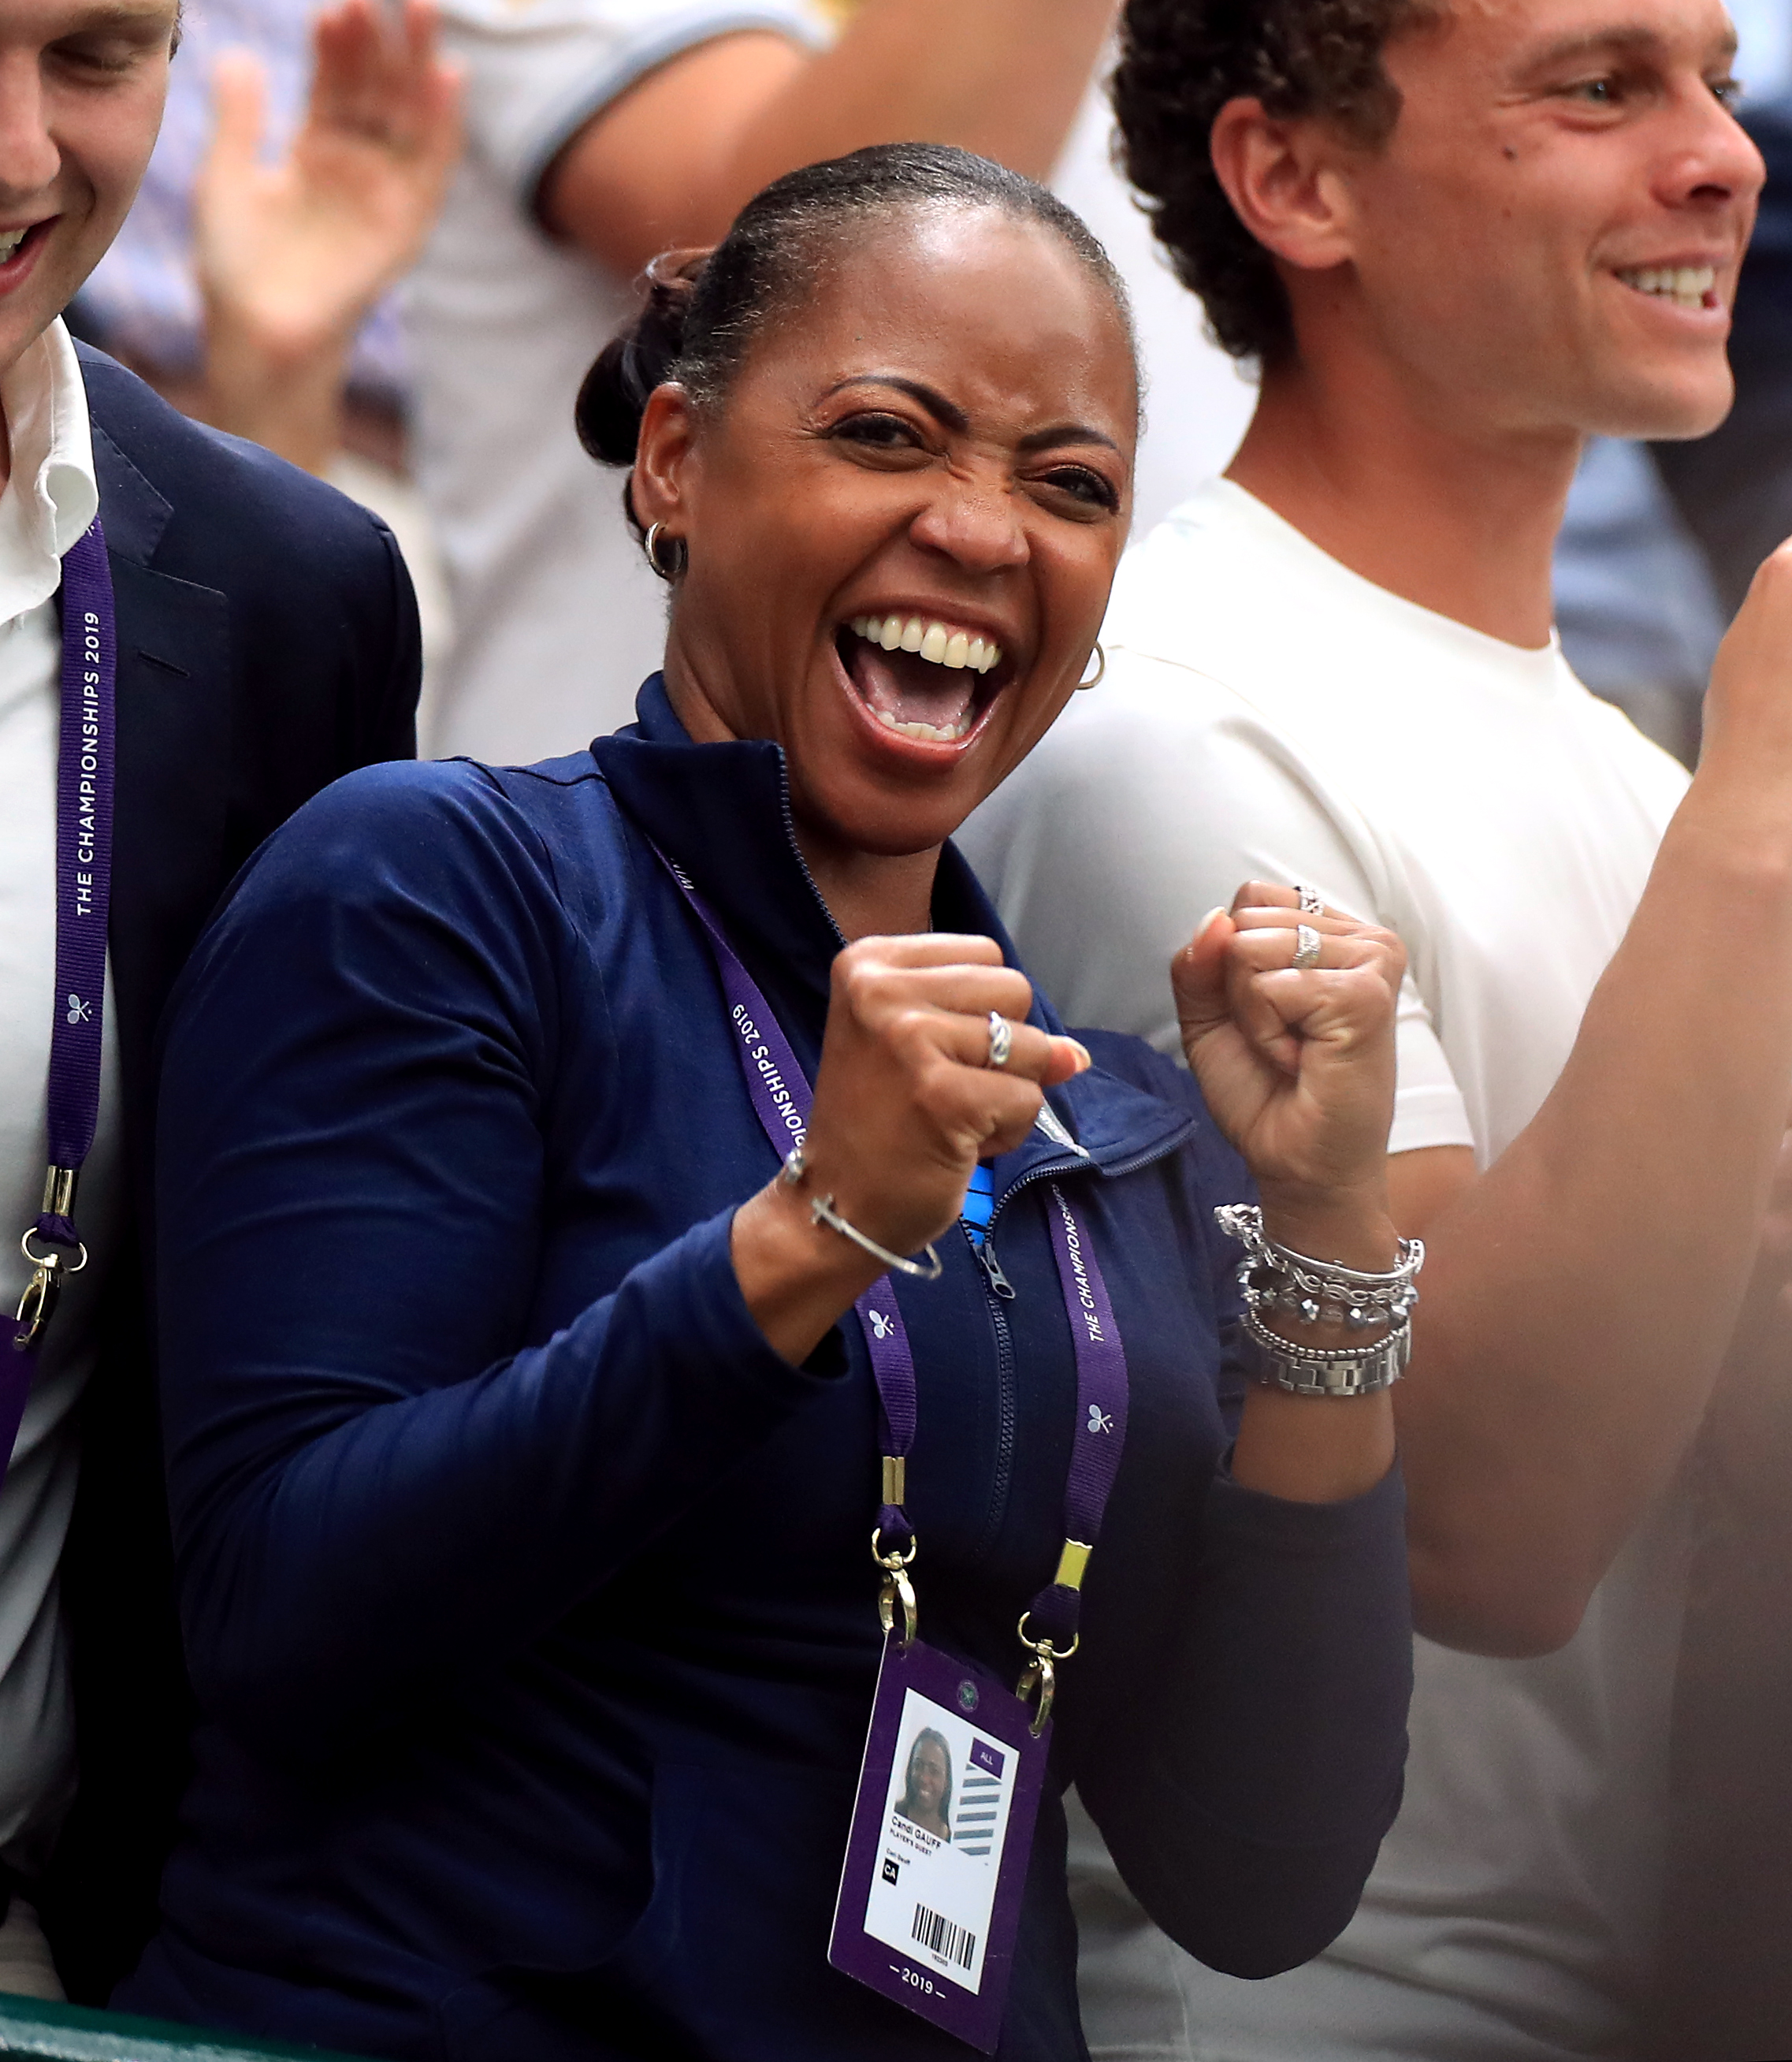 Candi Gauff celebrates after watching her daughter Cori Gauff beat Magdalena Rybarikova on day three of the Wimbledon Championships at the All England Lawn Tennis and Croquet Club on July 3, 2019, in Wimbledon. | Source: Getty Images